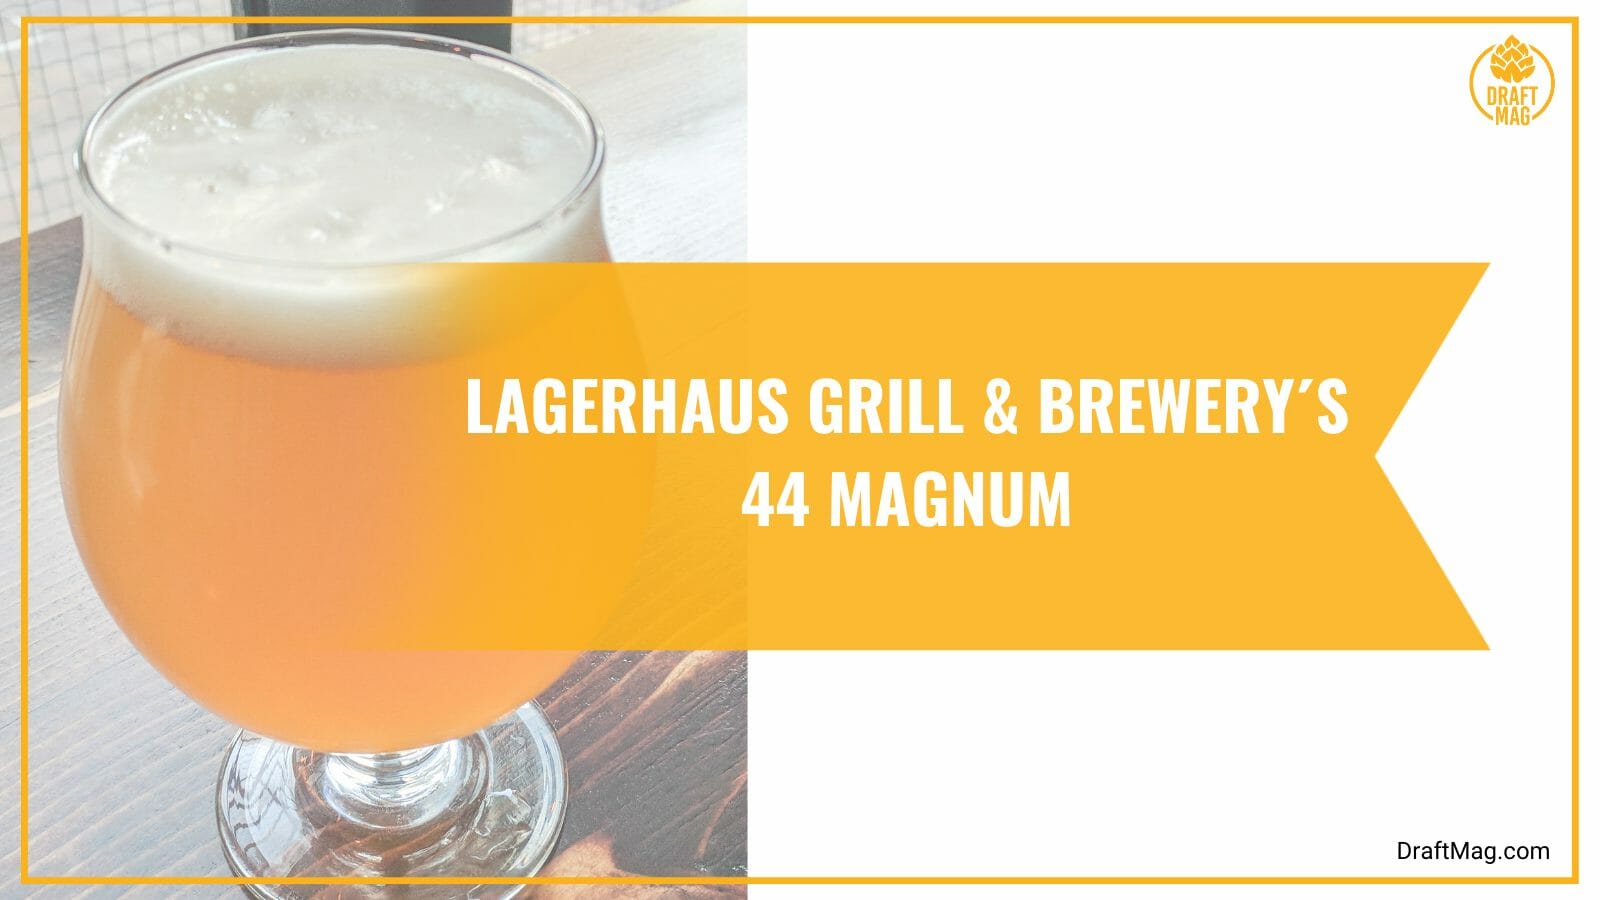 Lagerhaus grill brewery magnum